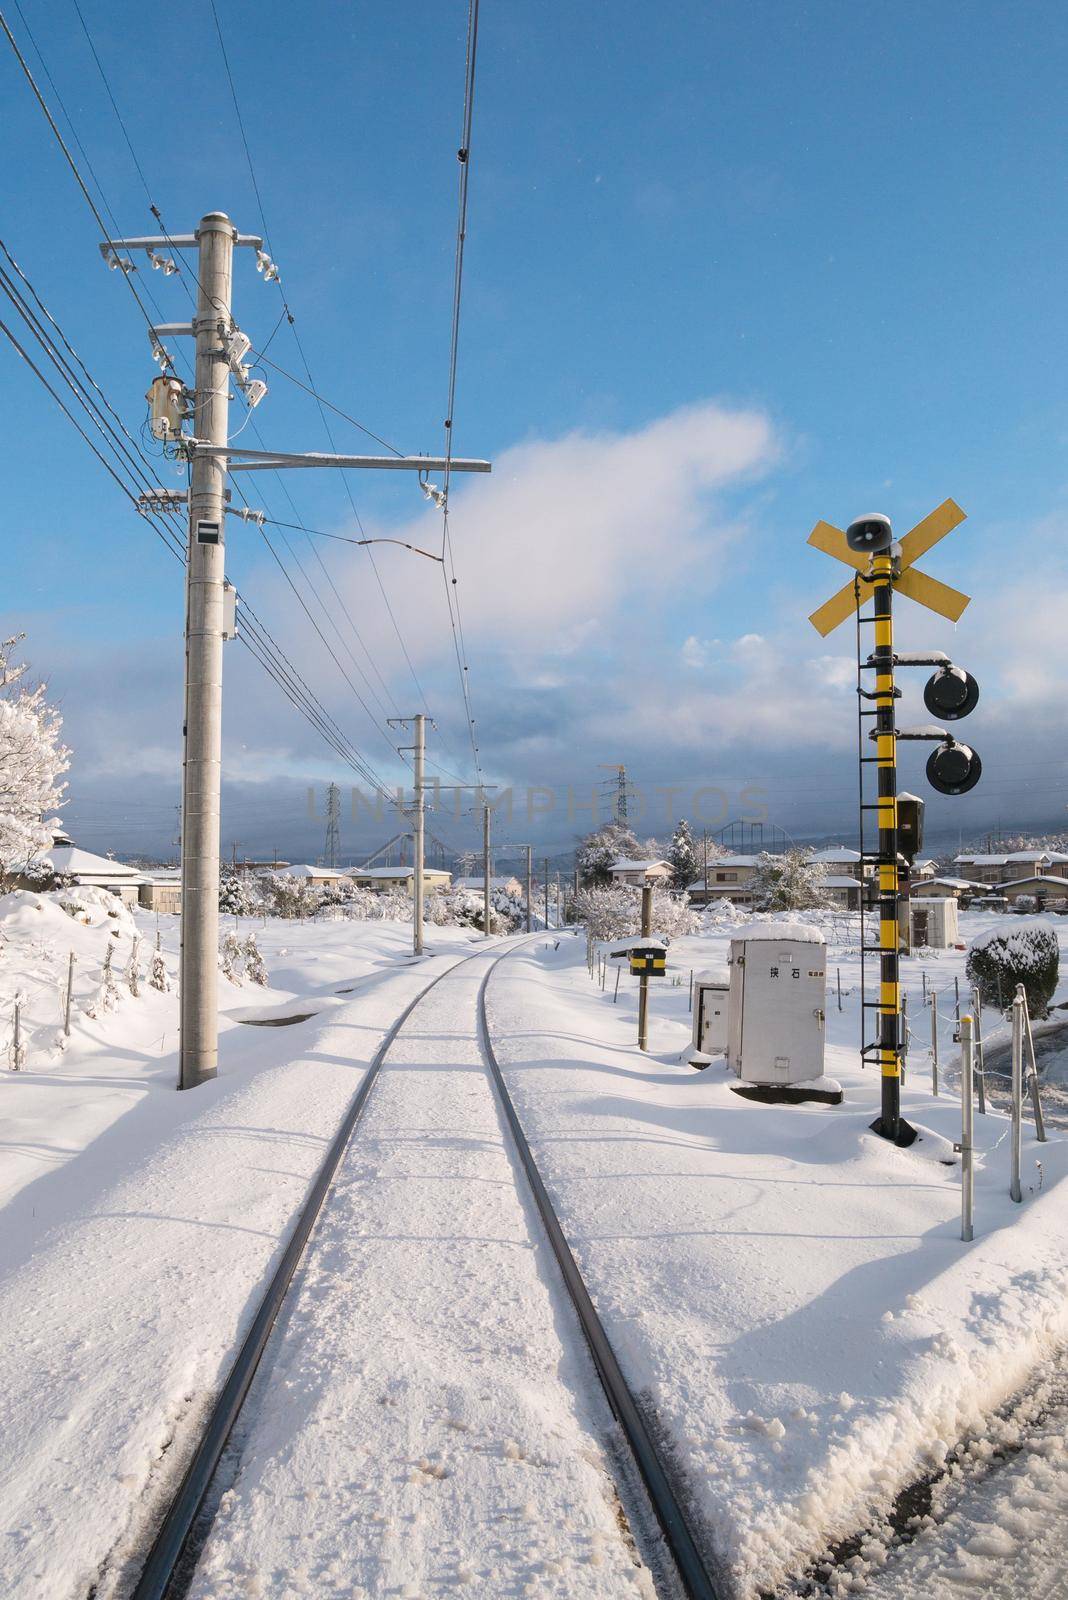 Railway track for local train with white snow fall in Japan by Nuamfolio